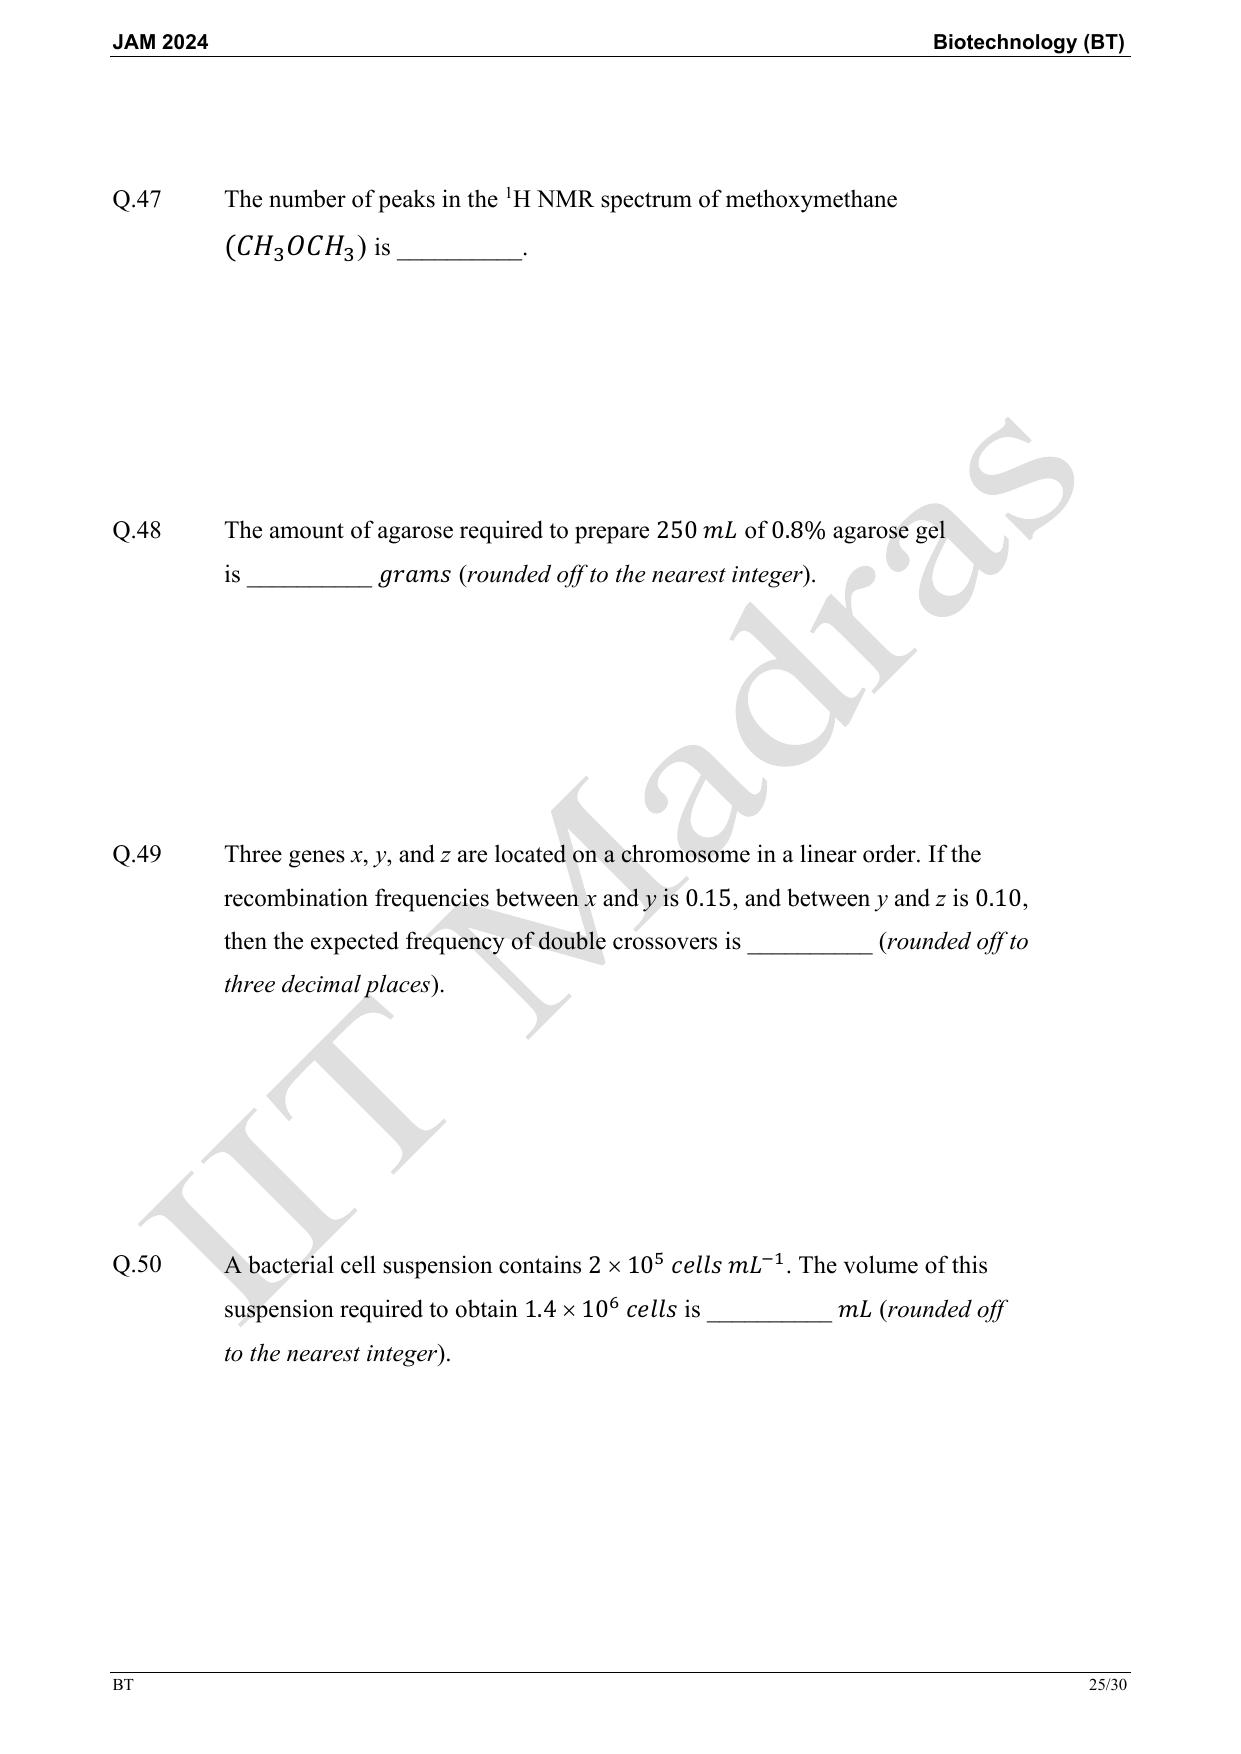 IIT JAM 2024 Biotechnology (BT) Master Question Paper - Page 25